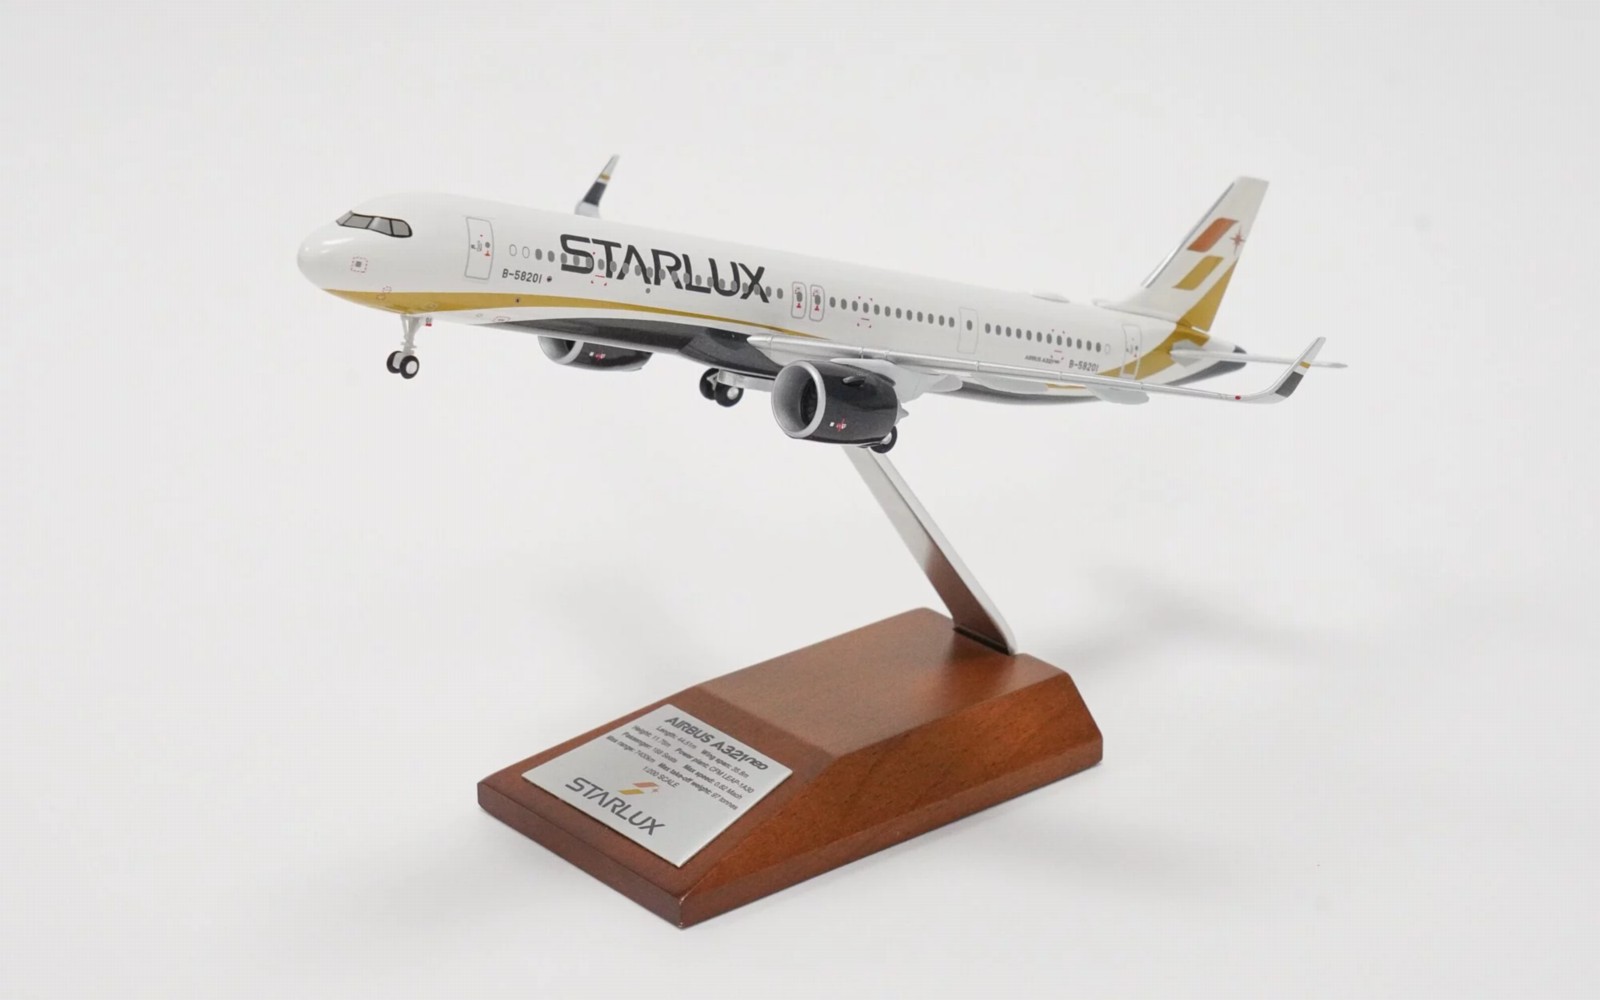 LGZ000003　STARLUX Airlines A321neo 1:200